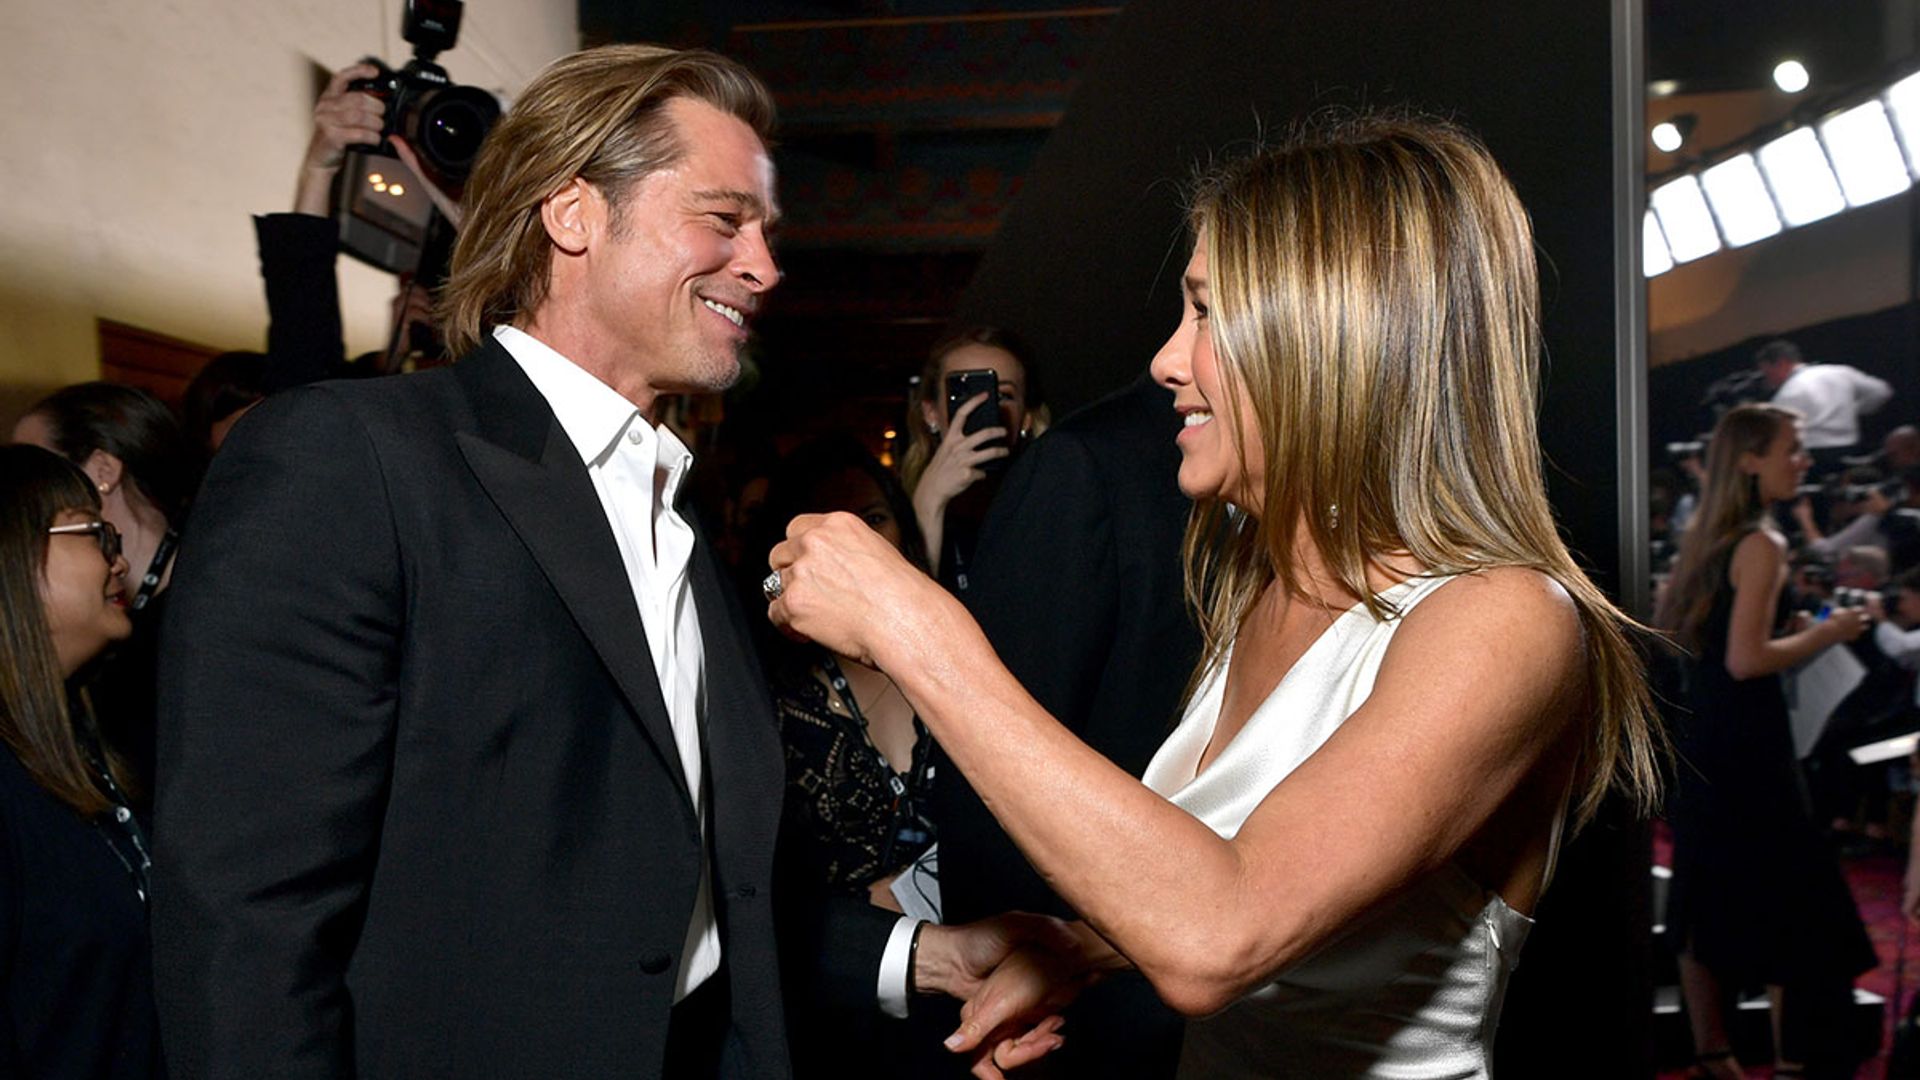 Brad Pitt and Jennifer Aniston reunite with sweet embrace - and Hollywood goes into meltdown!